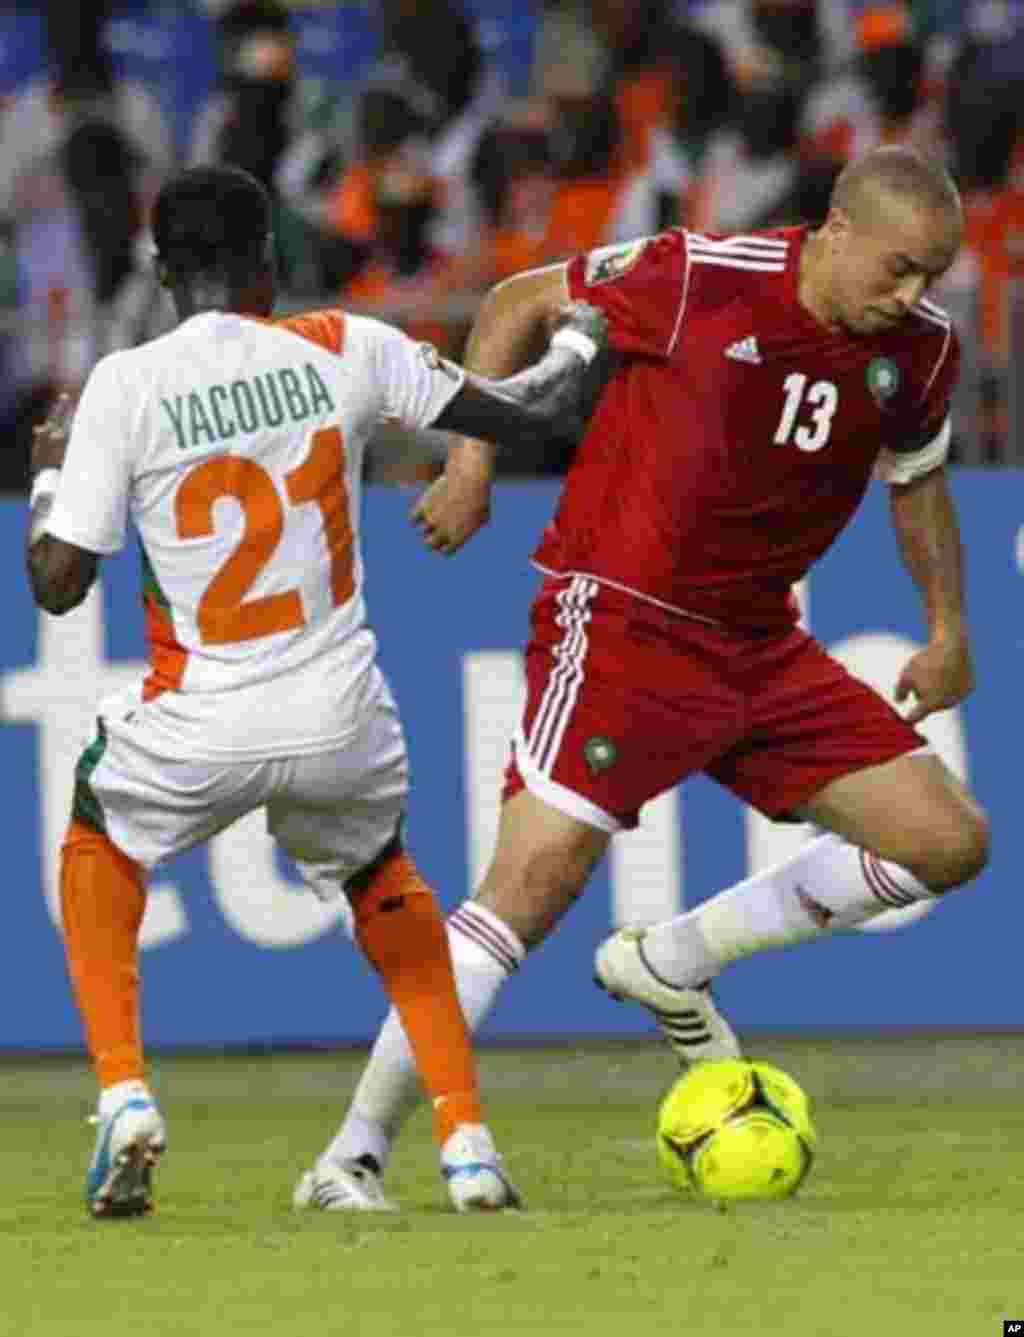 Morocco's Houssine Kharja (13) dribbles the ball against Niger's Seydou Ali Yacouba (21) during their final African Cup of Nations Group C soccer at the Stade De L'Amitie Stadium in Libreville, Gabon January 31, 2012.